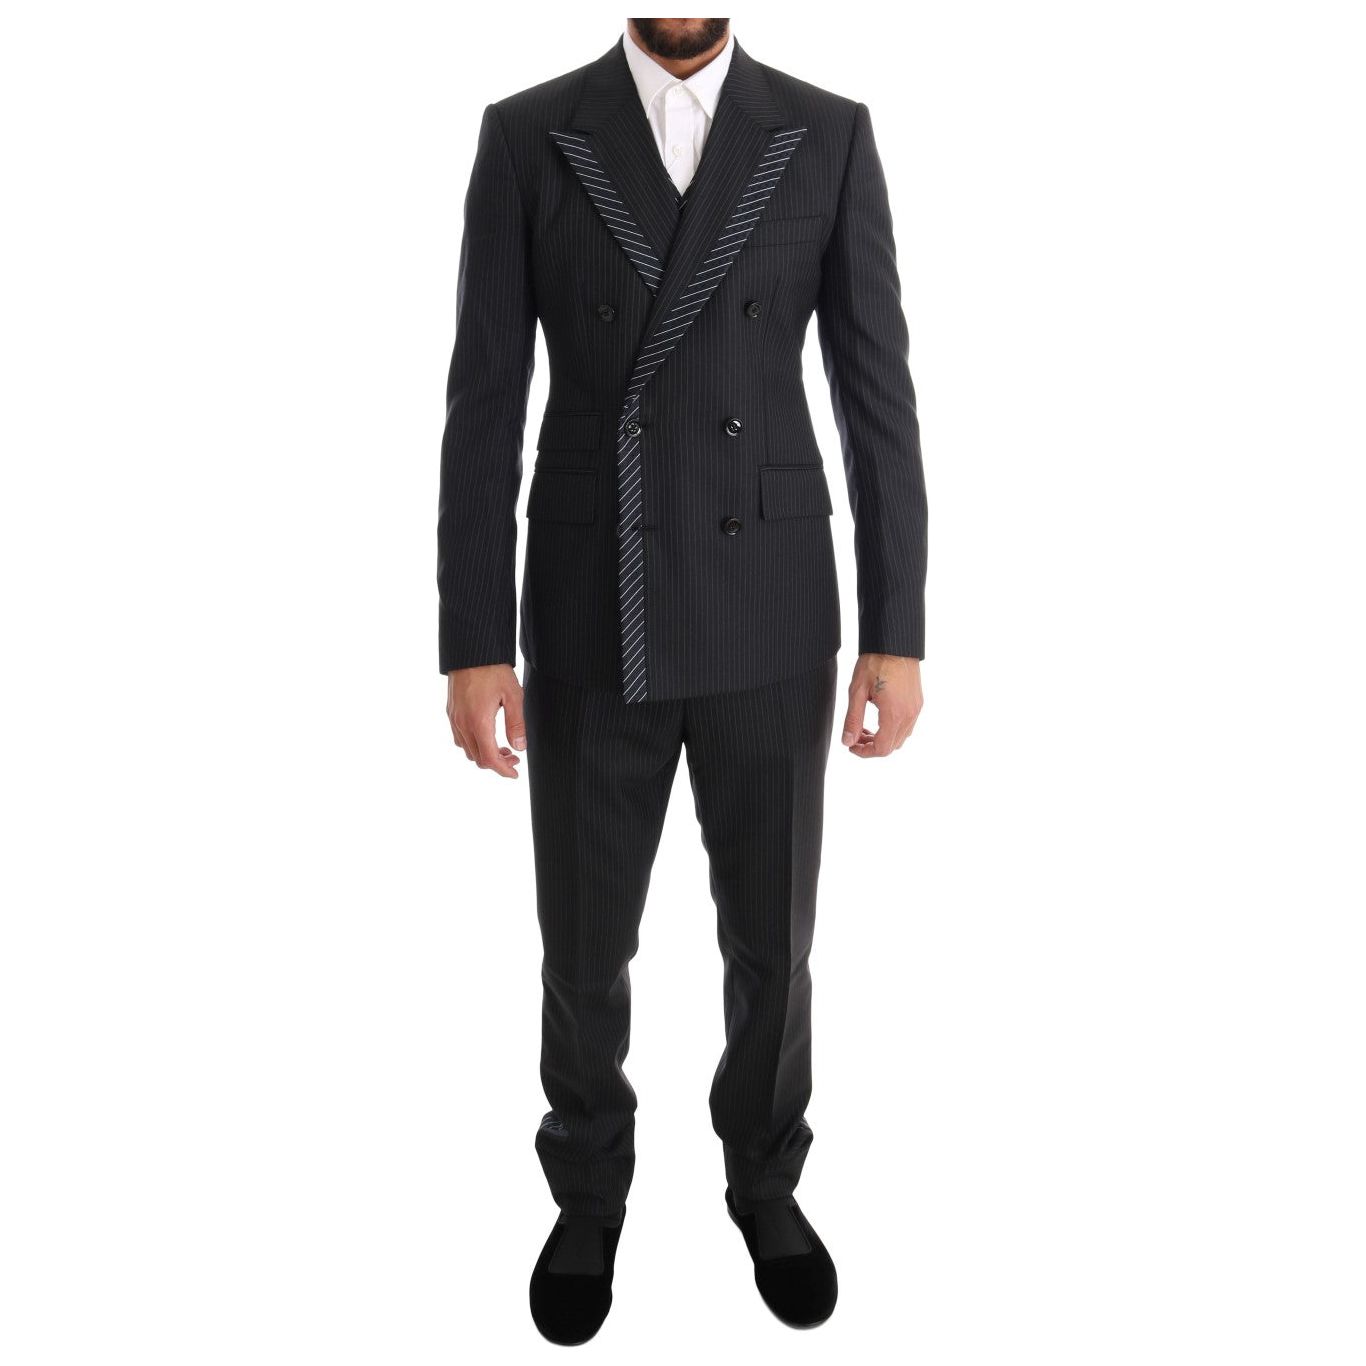 Dolce & Gabbana Elegant Gray Striped Wool Silk Men's 3-Piece Suit gray-double-breasted-3-piece-suit Suit 460447-gray-double-breasted-3-piece-suit.jpg